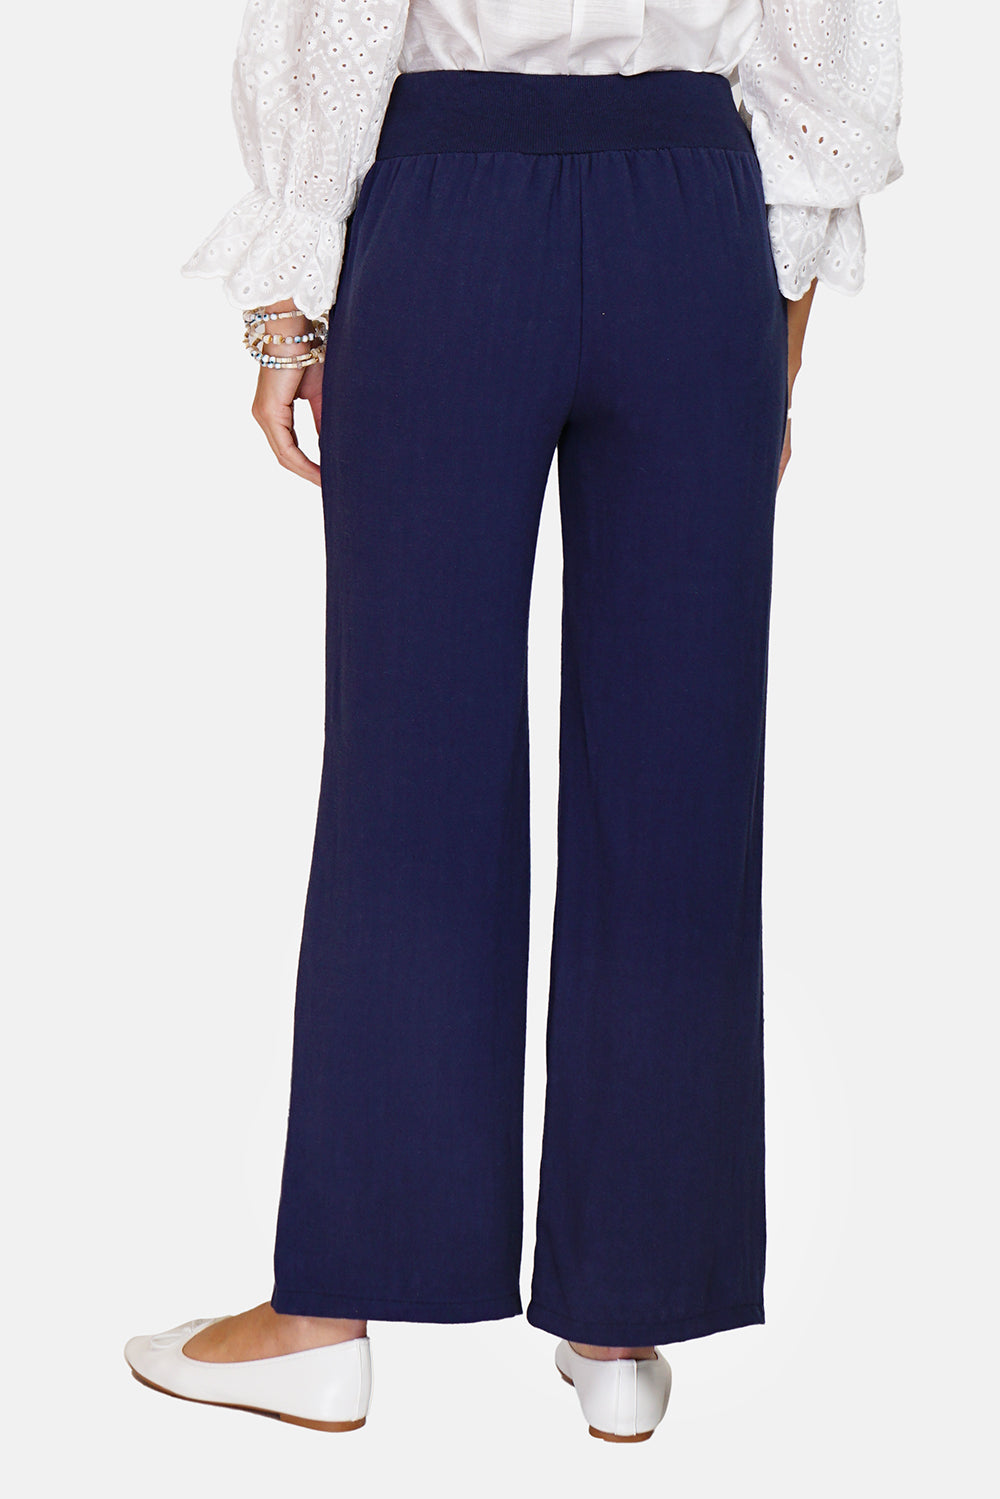 High-waisted straight-cut pants with side pockets